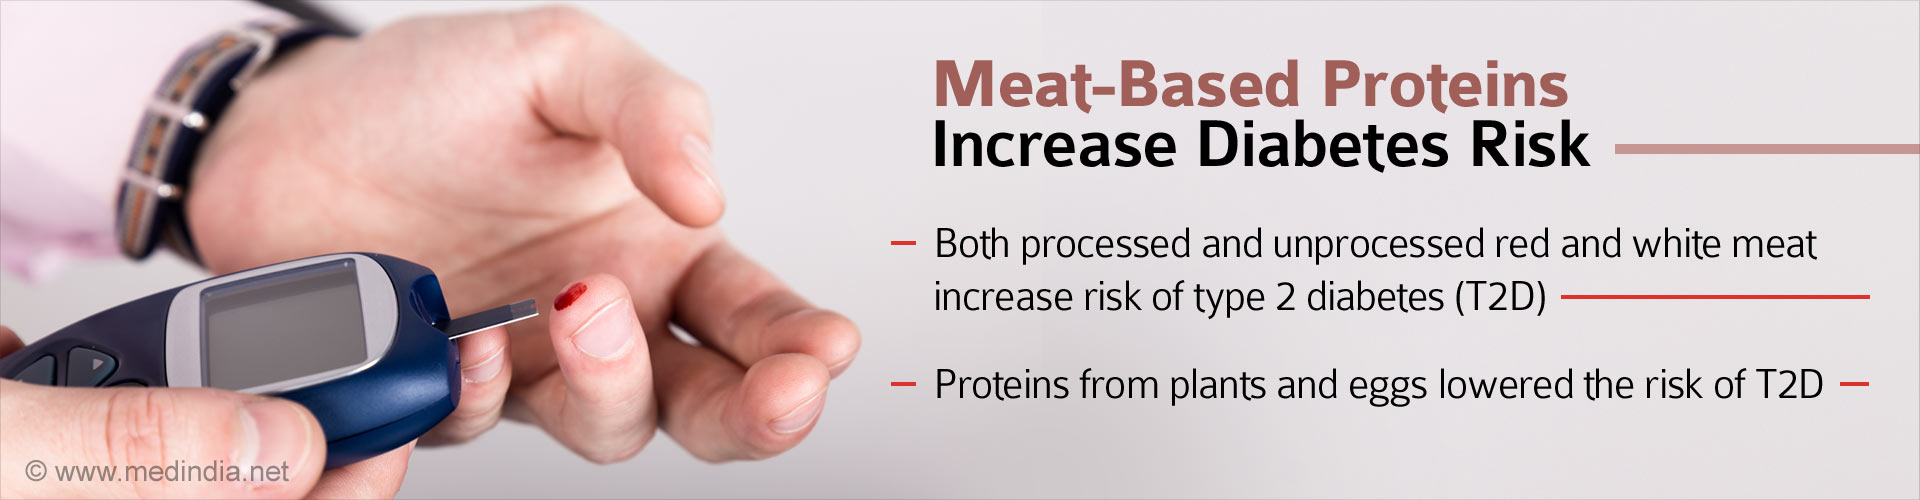 Meat-based proteins increase diabetes risk
- Both processed and unprocessed red and white meat increase risk of type 2 diabetes (T2D)
- Proteins from plants and eggs lowered the risk of T2D